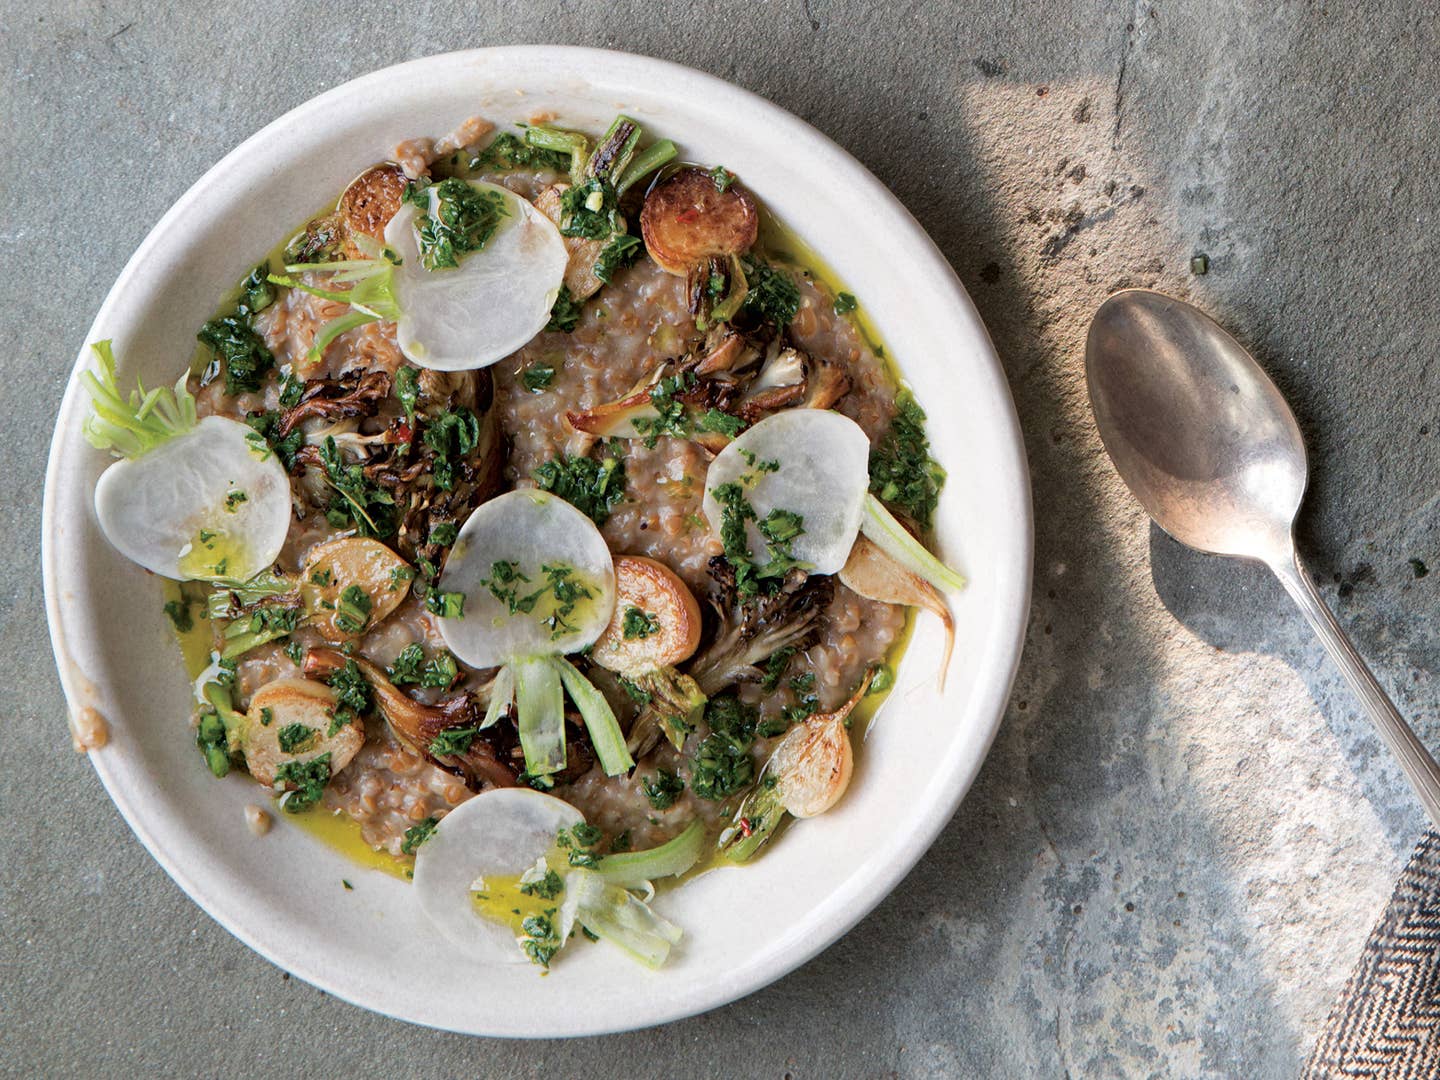 Cracked-Wheat Porridge with Hen of the Woods Mushrooms and Turnip-Top Salsa